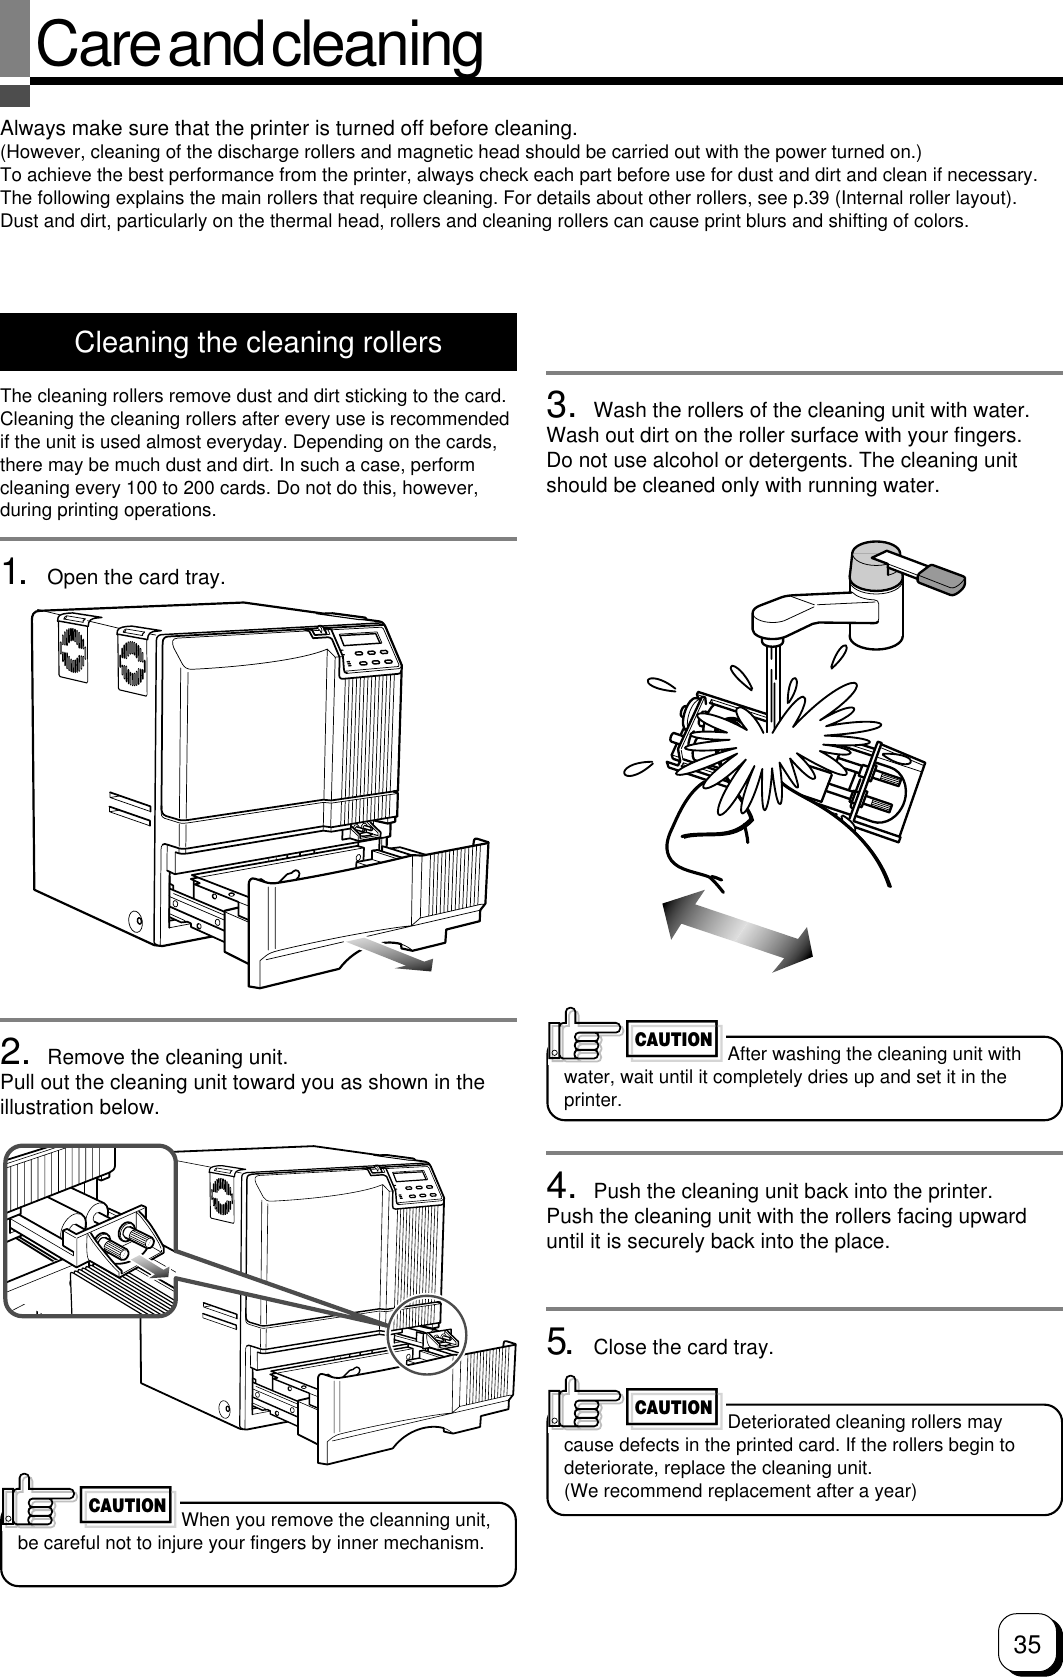 35Care and cleaningAlways make sure that the printer is turned off before cleaning.(However, cleaning of the discharge rollers and magnetic head should be carried out with the power turned on.)To achieve the best performance from the printer, always check each part before use for dust and dirt and clean if necessary.The following explains the main rollers that require cleaning. For details about other rollers, see p.39 (Internal roller layout).Dust and dirt, particularly on the thermal head, rollers and cleaning rollers can cause print blurs and shifting of colors.Cleaning the cleaning rollersThe cleaning rollers remove dust and dirt sticking to the card.Cleaning the cleaning rollers after every use is recommendedif the unit is used almost everyday. Depending on the cards,there may be much dust and dirt. In such a case, performcleaning every 100 to 200 cards. Do not do this, however,during printing operations.1. Open the card tray.2. Remove the cleaning unit.Pull out the cleaning unit toward you as shown in theillustration below.3. Wash the rollers of the cleaning unit with water.Wash out dirt on the roller surface with your fingers.Do not use alcohol or detergents. The cleaning unitshould be cleaned only with running water.4. Push the cleaning unit back into the printer.Push the cleaning unit with the rollers facing upwarduntil it is securely back into the place.5. Close the card tray.After washing the cleaning unit withwater, wait until it completely dries up and set it in theprinter.CAUTIONDeteriorated cleaning rollers maycause defects in the printed card. If the rollers begin todeteriorate, replace the cleaning unit.(We recommend replacement after a year)CAUTIONWhen you remove the cleanning unit,be careful not to injure your fingers by inner mechanism.CAUTION